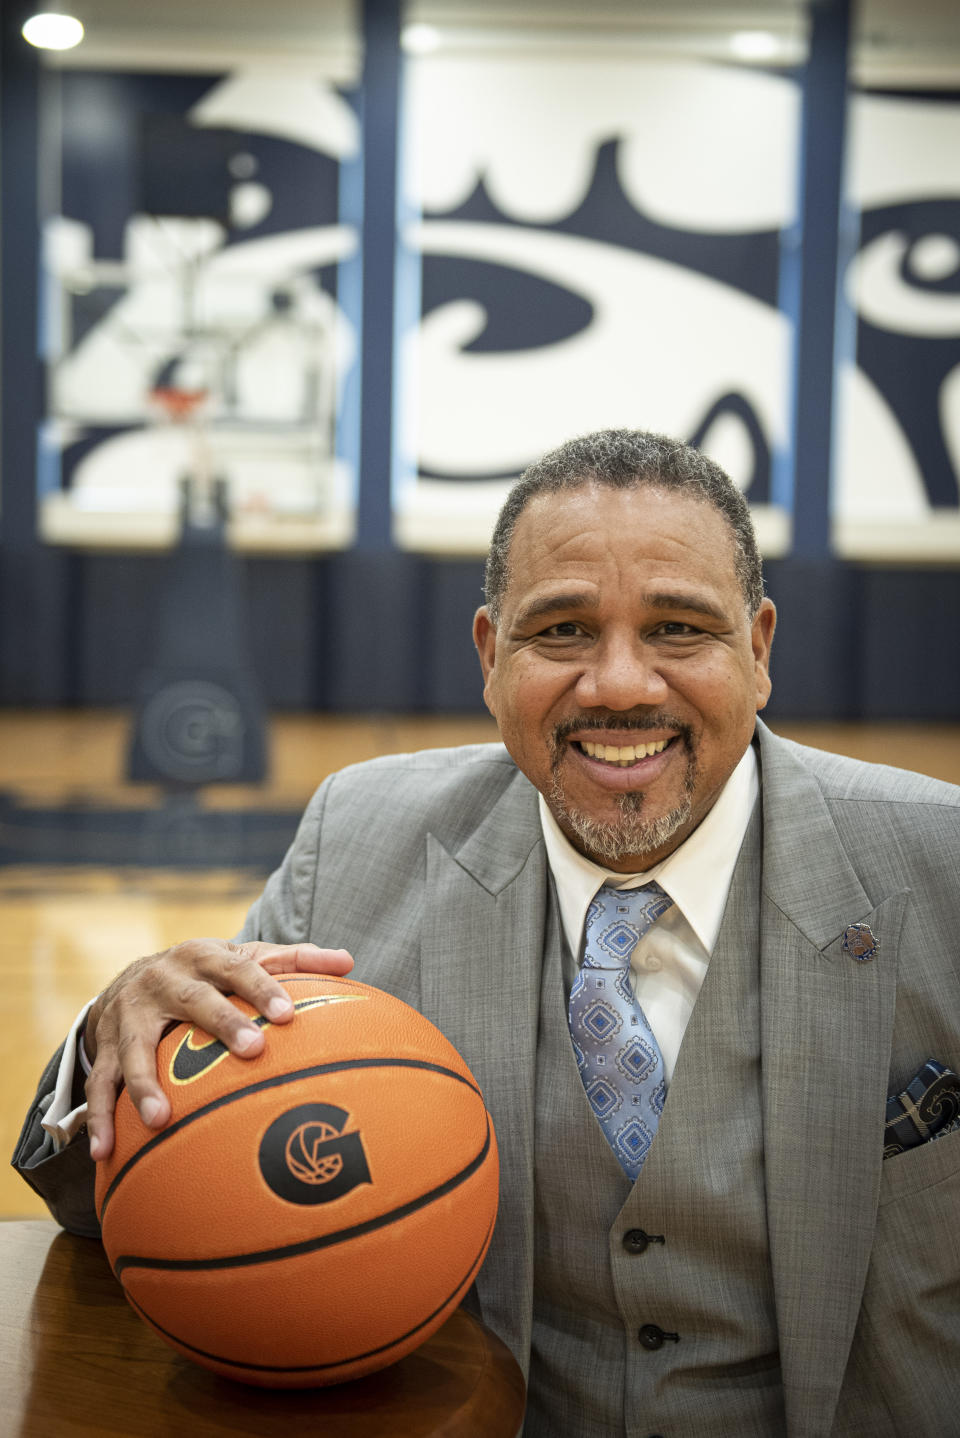 New Georgetown NCAA college basketball head coach Ed Cooley poses in Washington, Wednesday, March 22, 2023. (AP Photo/Cliff Owen)